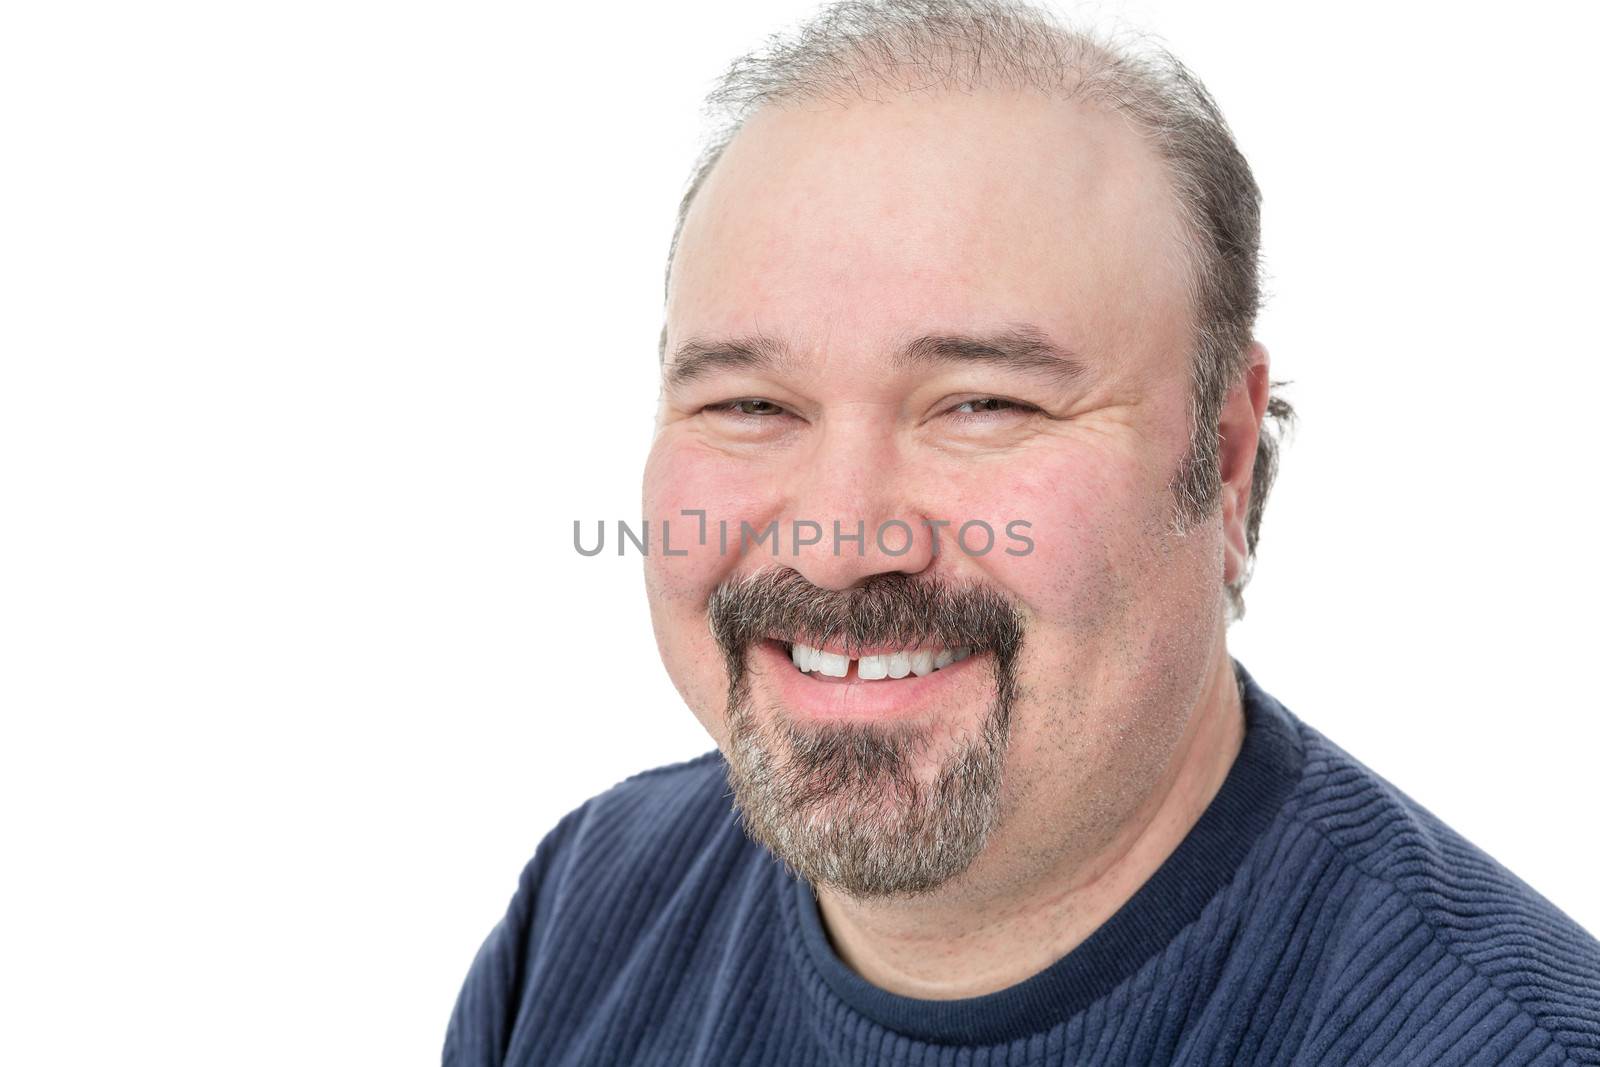 Closeup portrait of a middle-aged man with a goatee enjoying a good laugh smiling happily at the camera isolated on white with copyspace